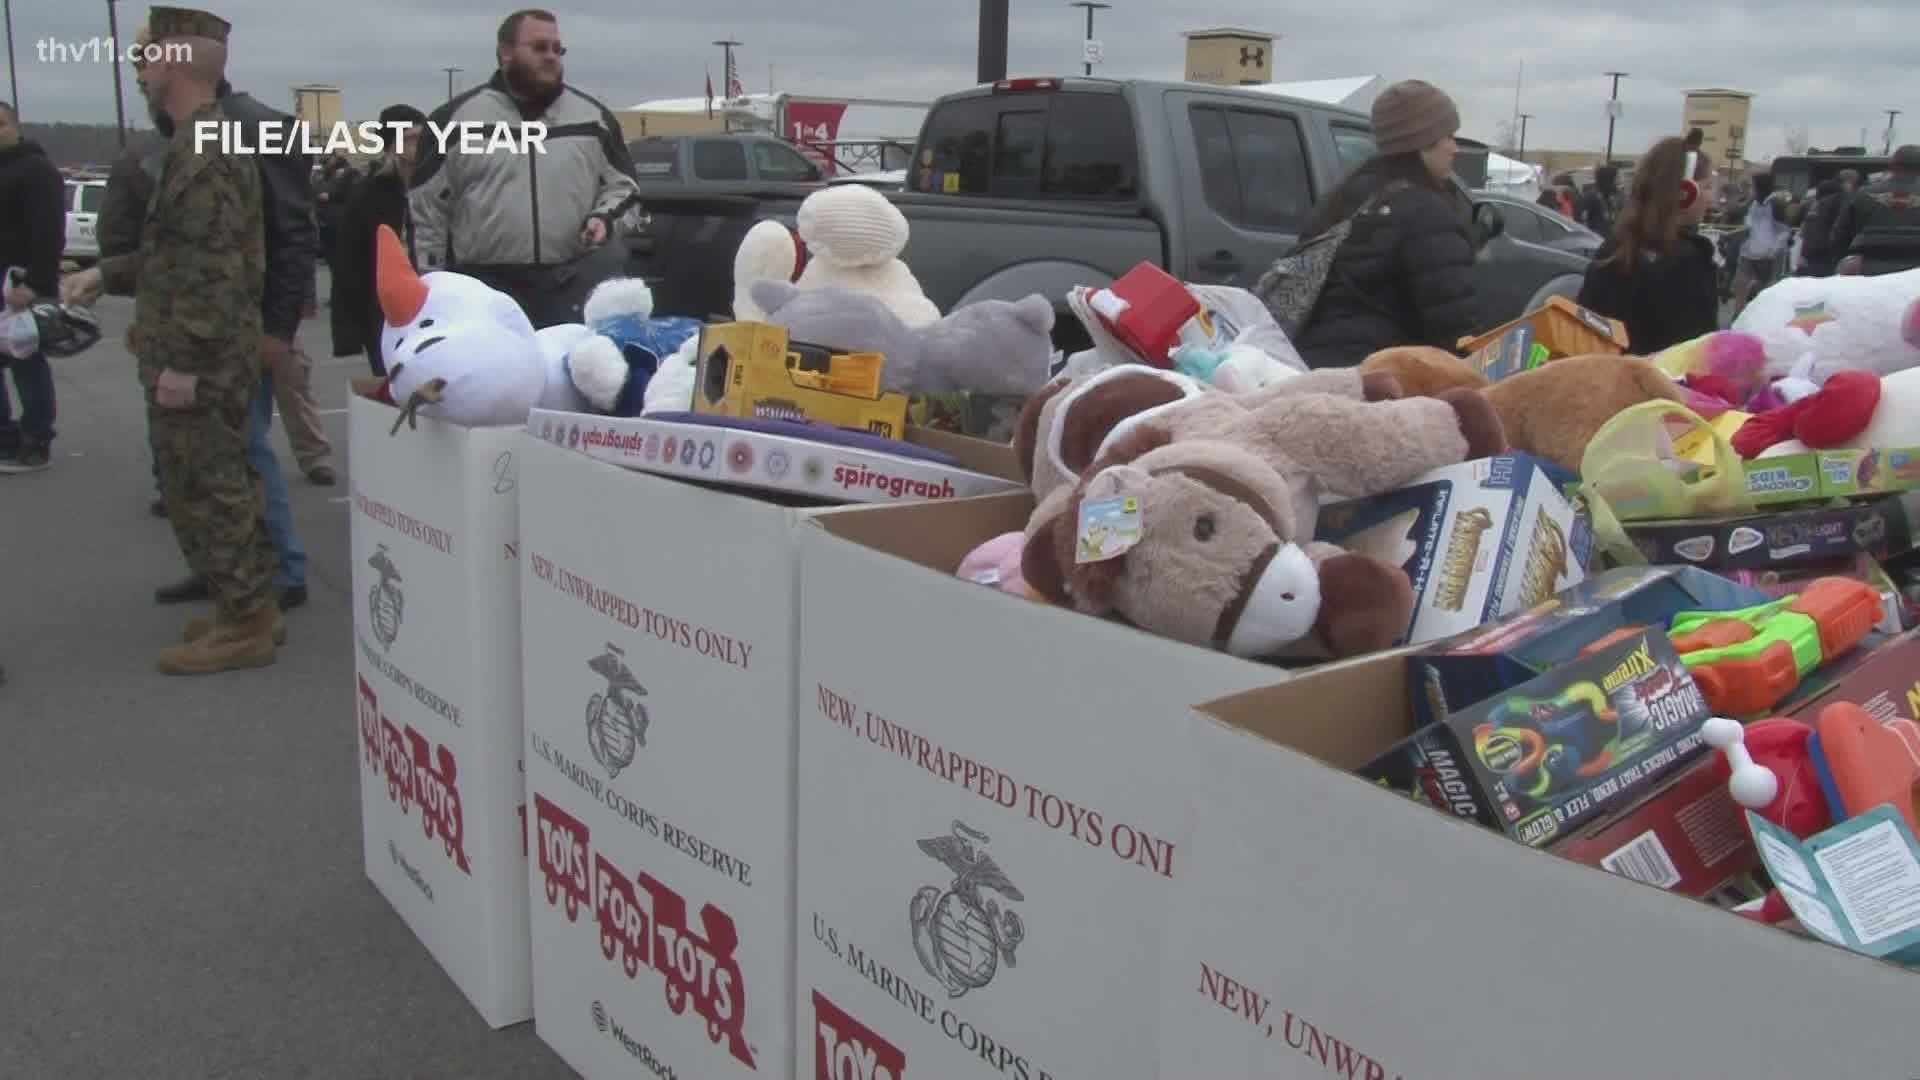 The toy run benefits the Marine Corps Reserve Toys for Tots campaign.